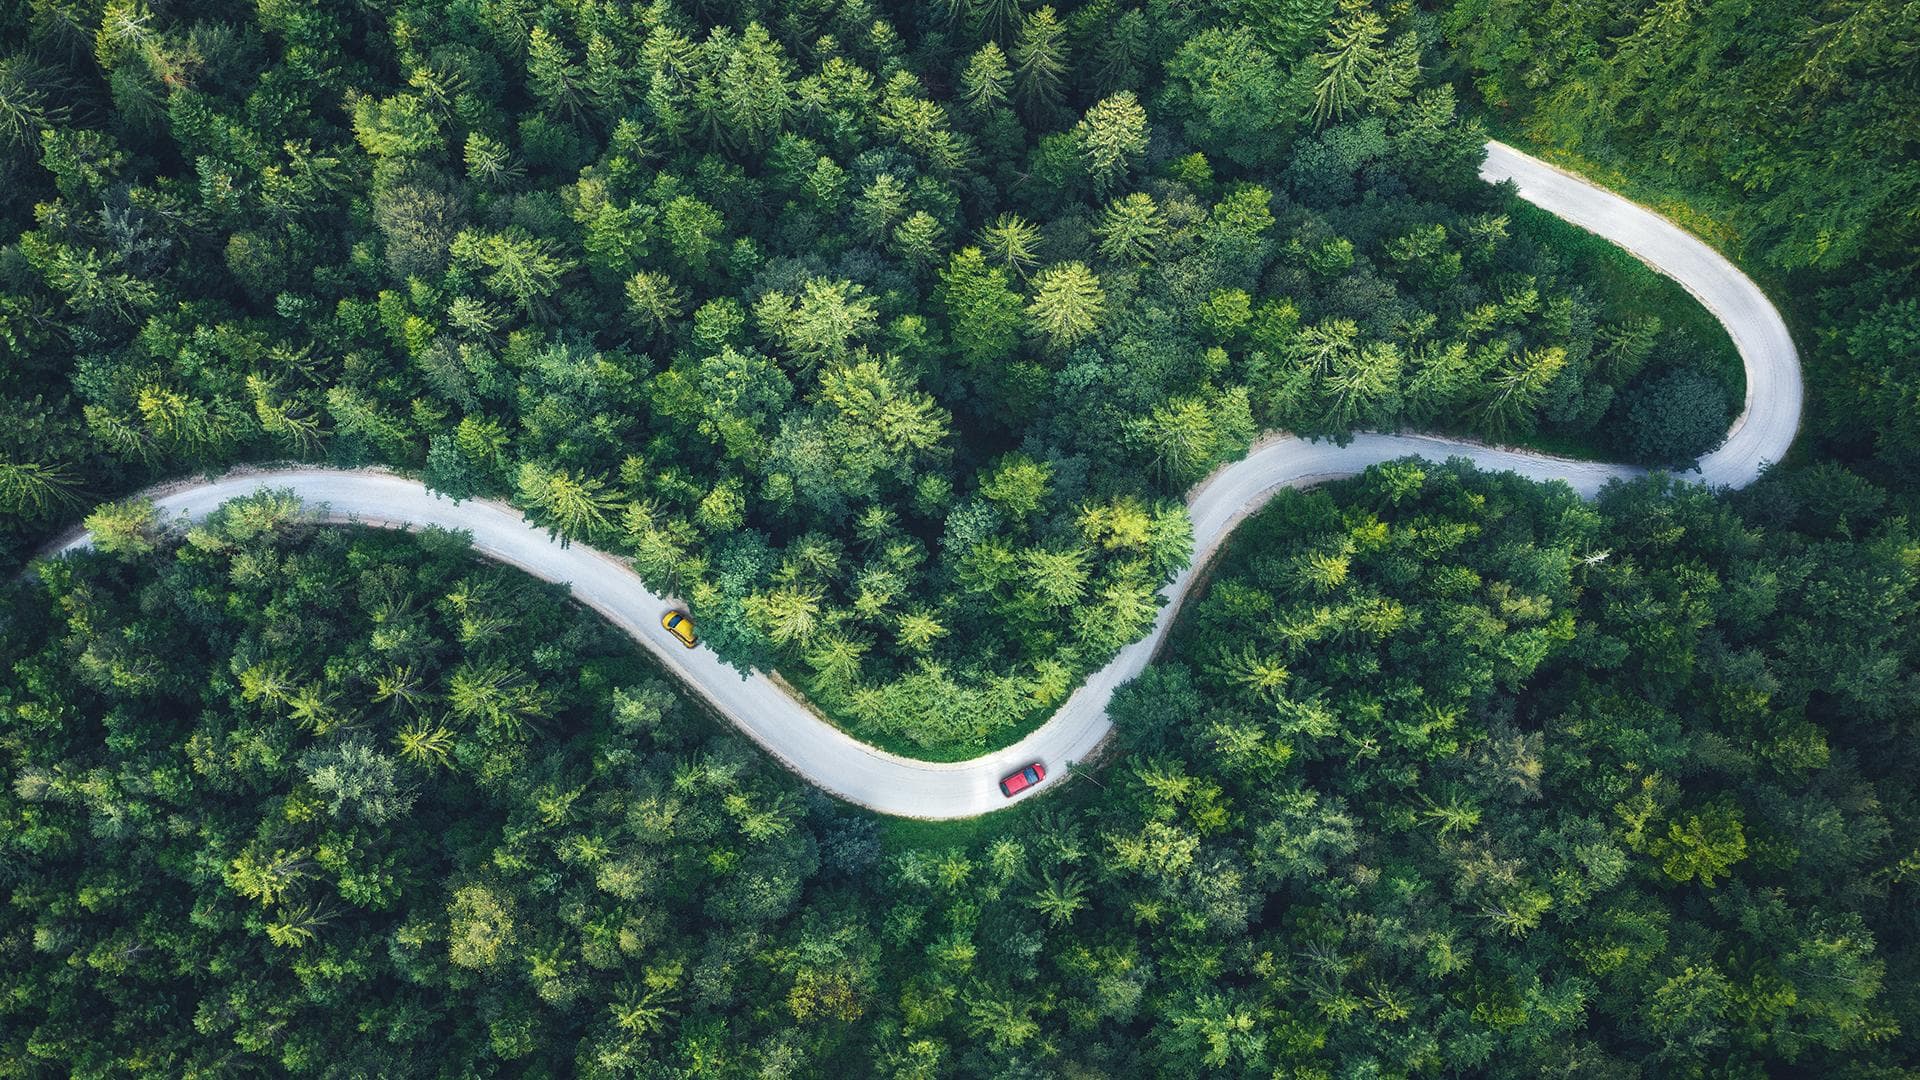 Cars driving on Idyllic winding road through the green forest.